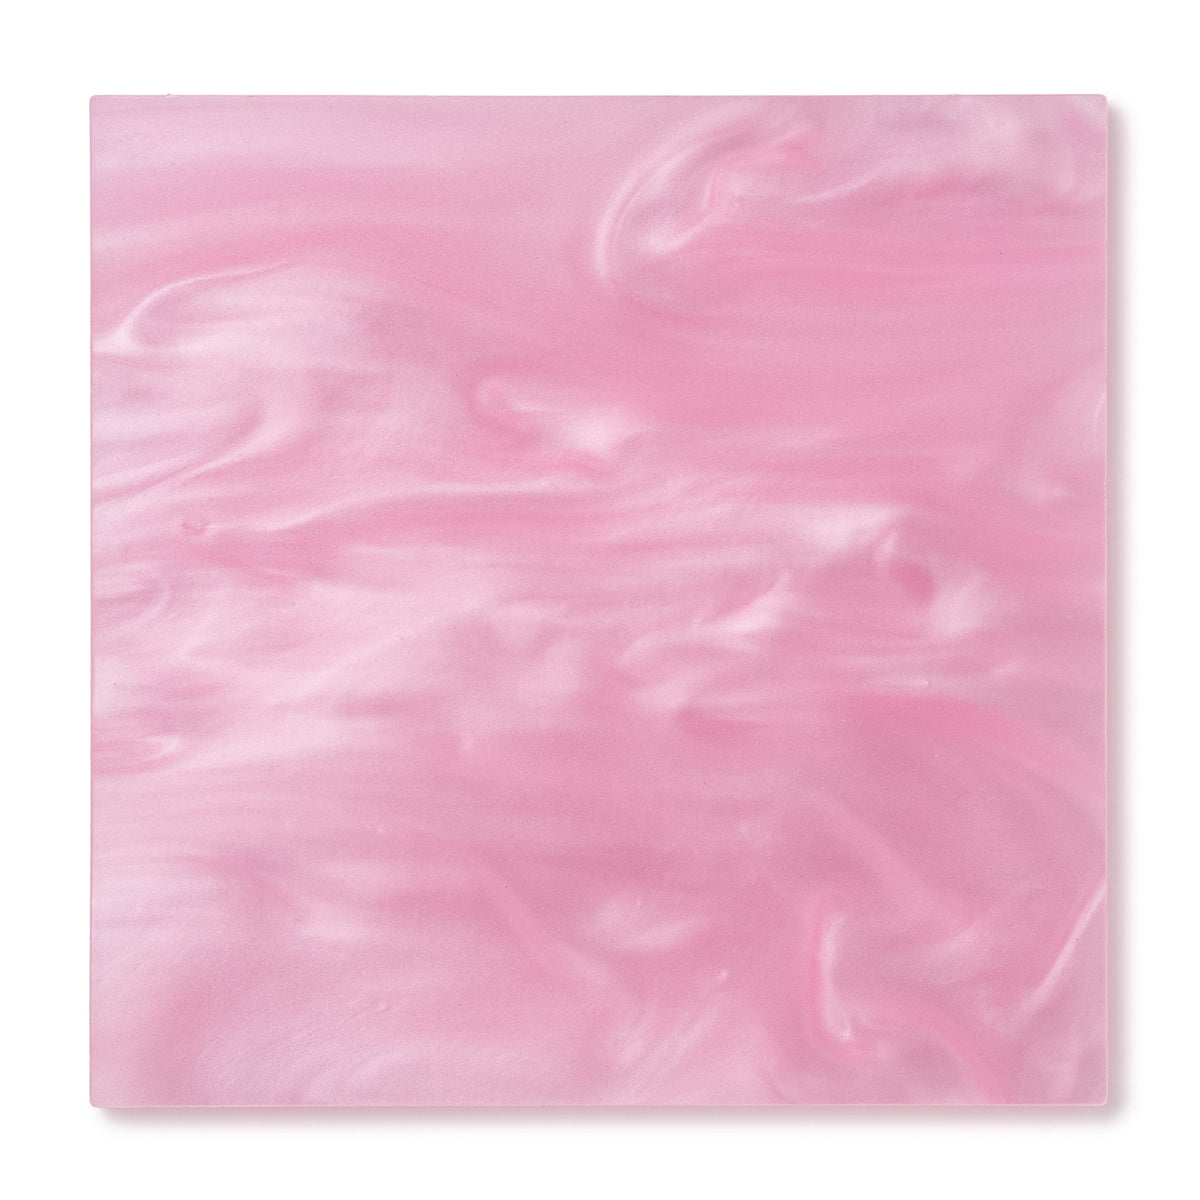 Light Pink Colored Pearlescent Acrylic Sheet, Swatch View